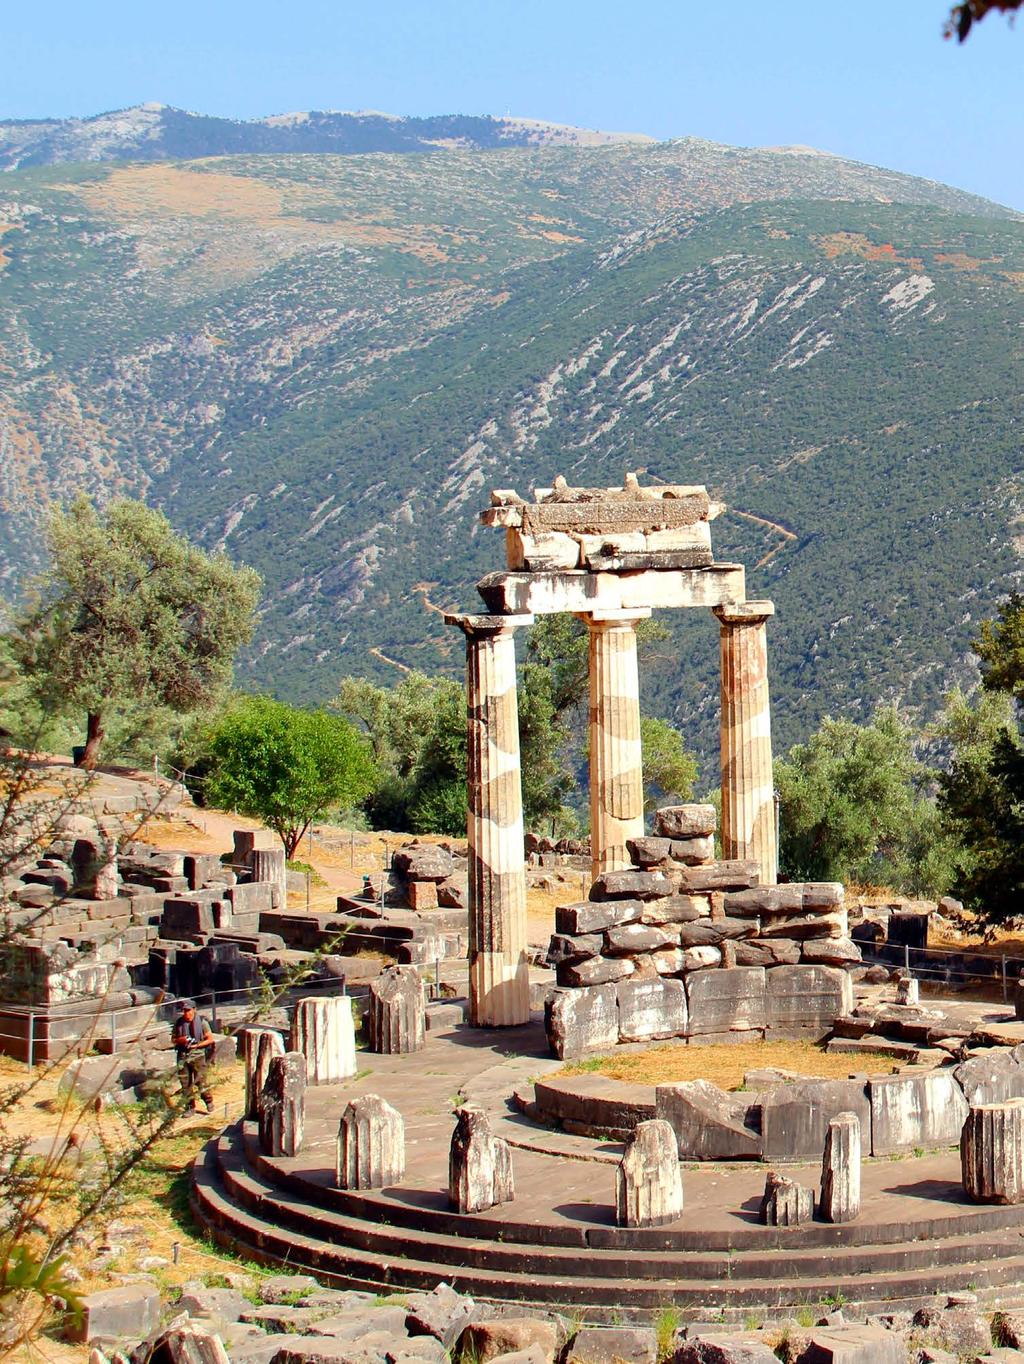 Dr. Sue Adventure & Meditation Itinerary: Greece, September 4-14, 2019 would discuss politics and philosophy.